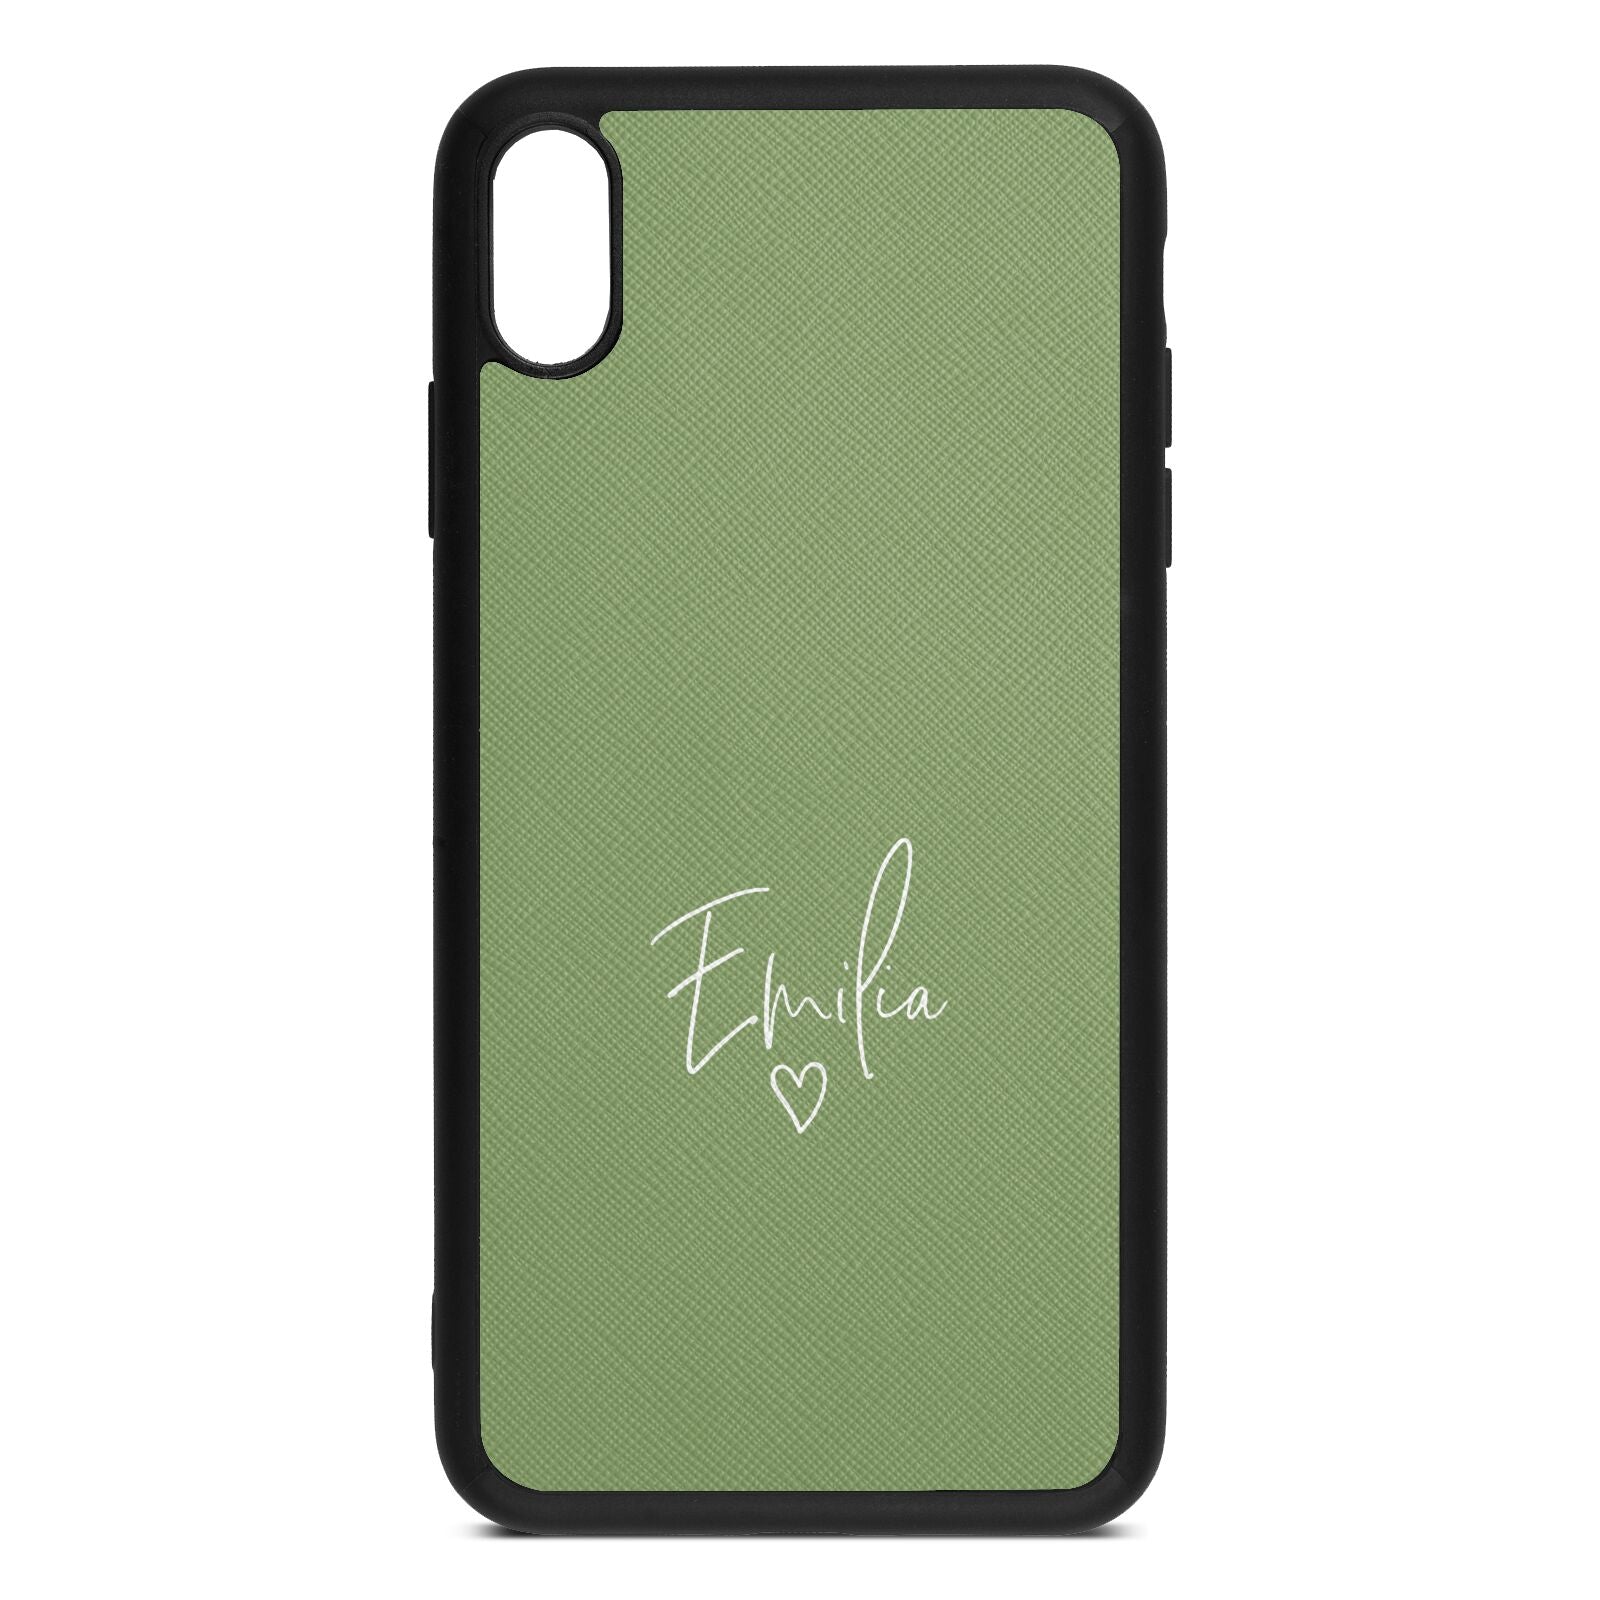 White Handwritten Name Transparent Lime Saffiano Leather iPhone Xs Max Case